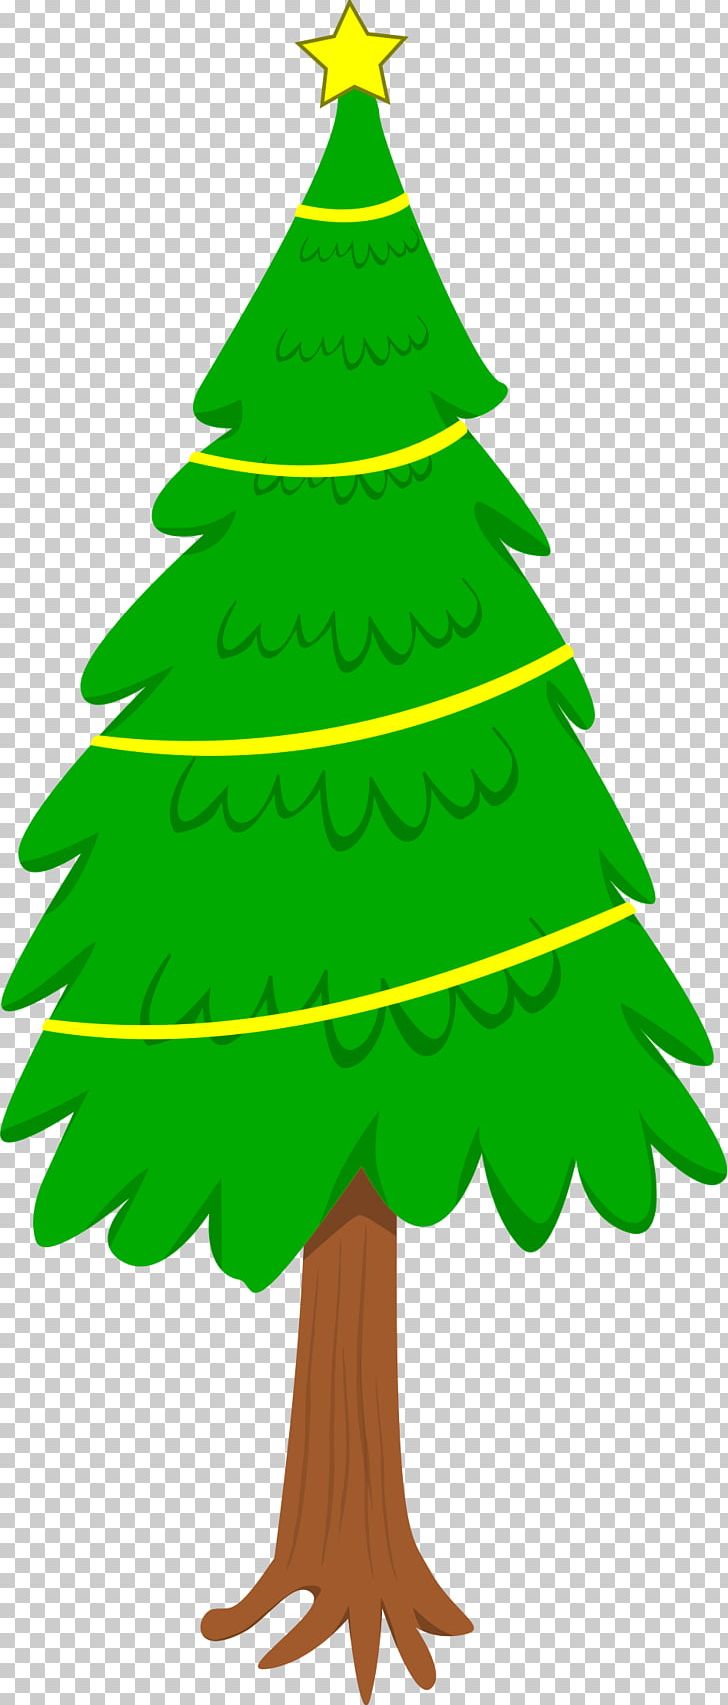 Christmas Tree Christmas Ornament PNG, Clipart, Angel, Branch, Christmas, Christmas Decoration, Christmas Lights Free PNG Download